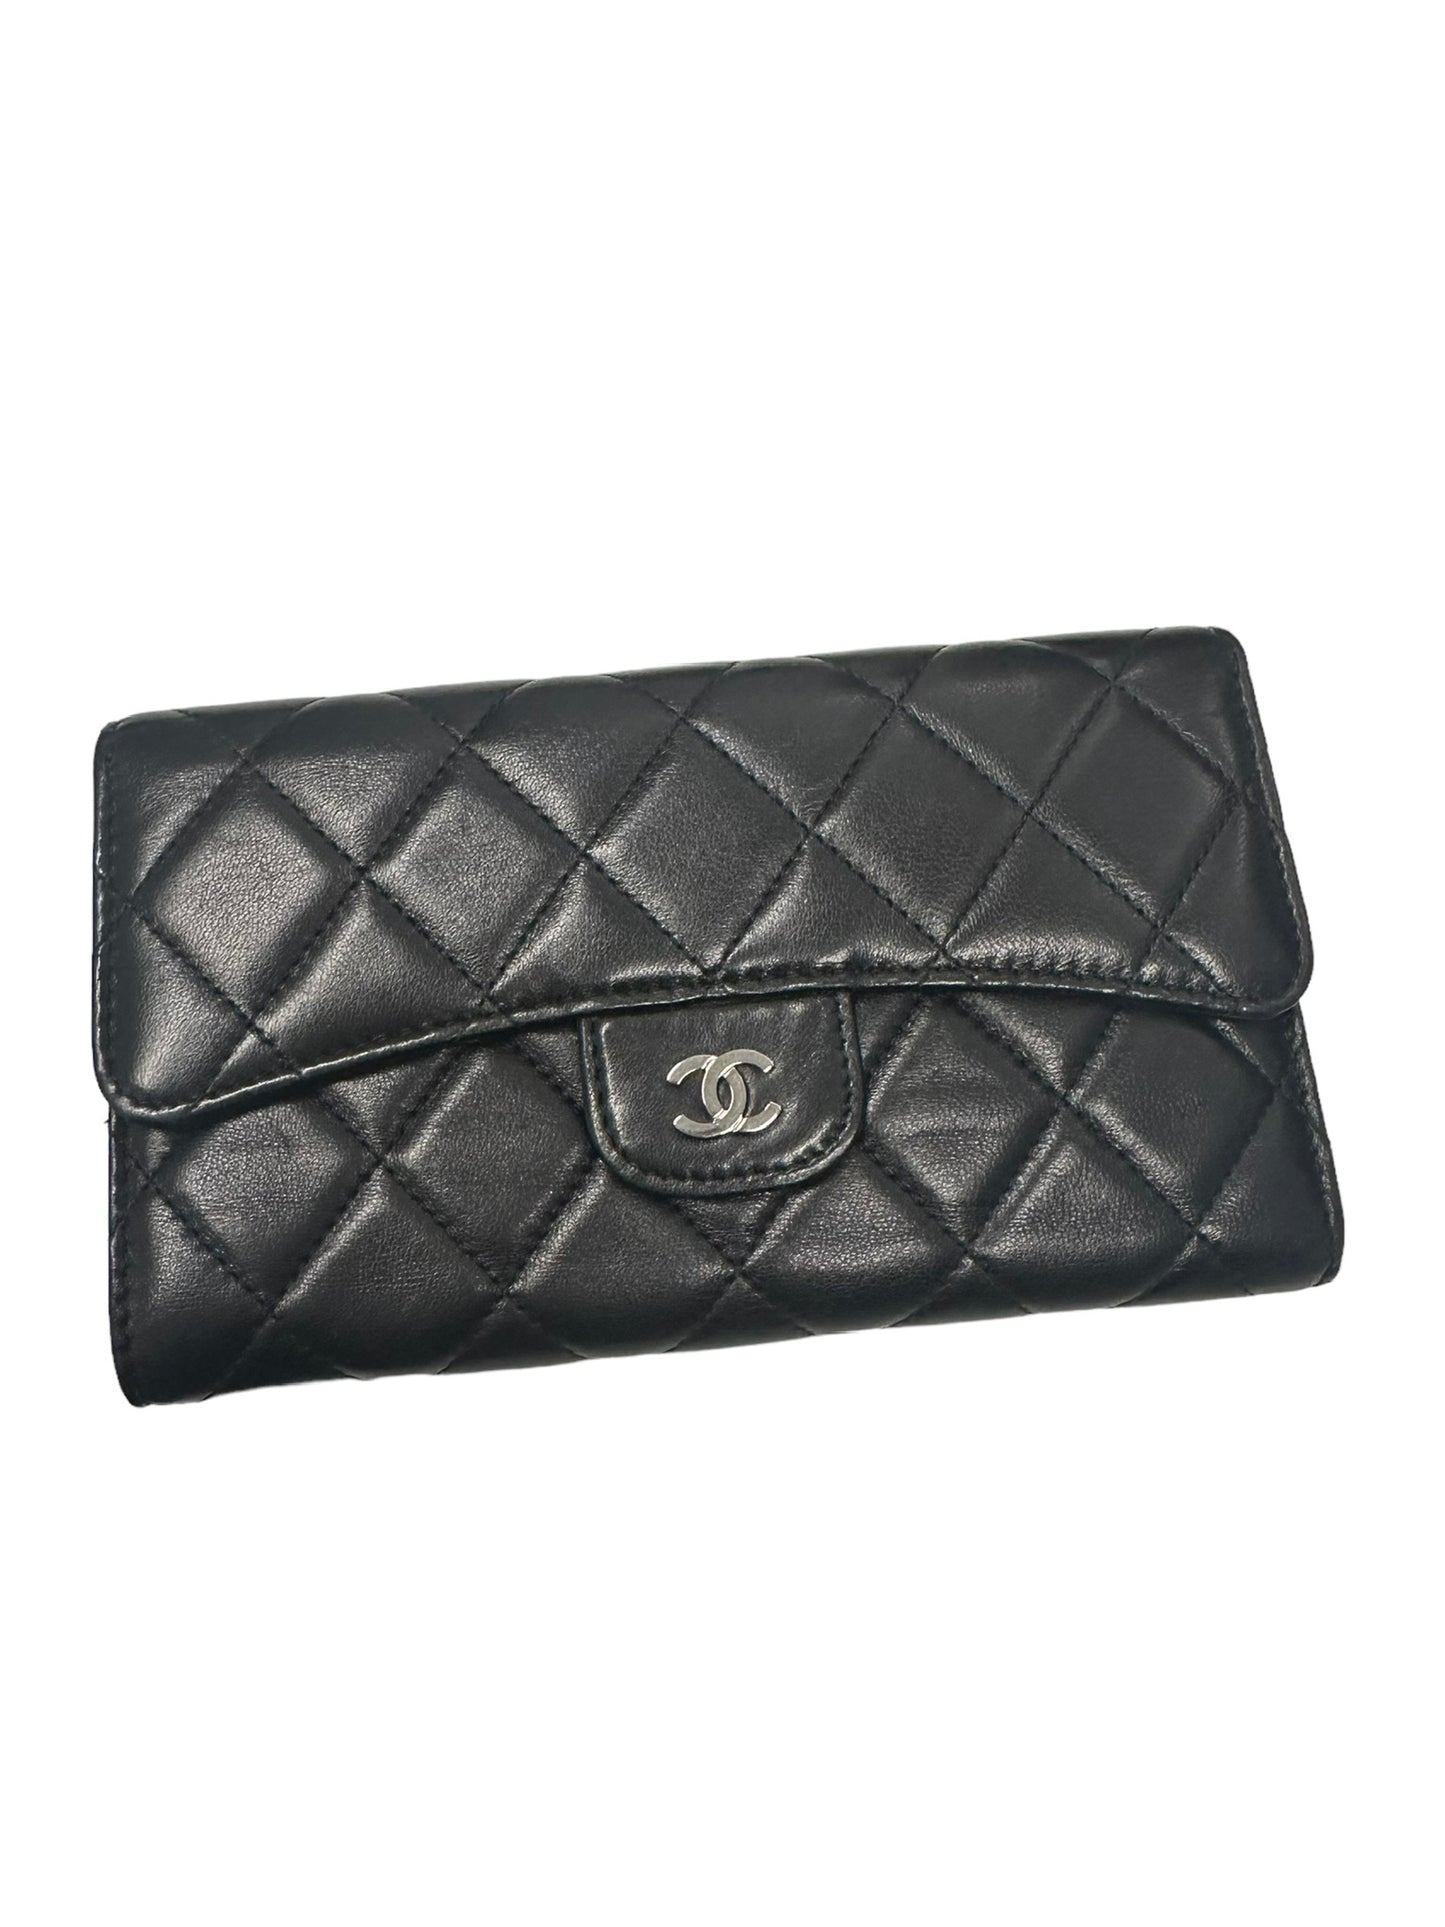 CHANEL -  Black Quilted Lambskin Large Flap Gusset Wallet